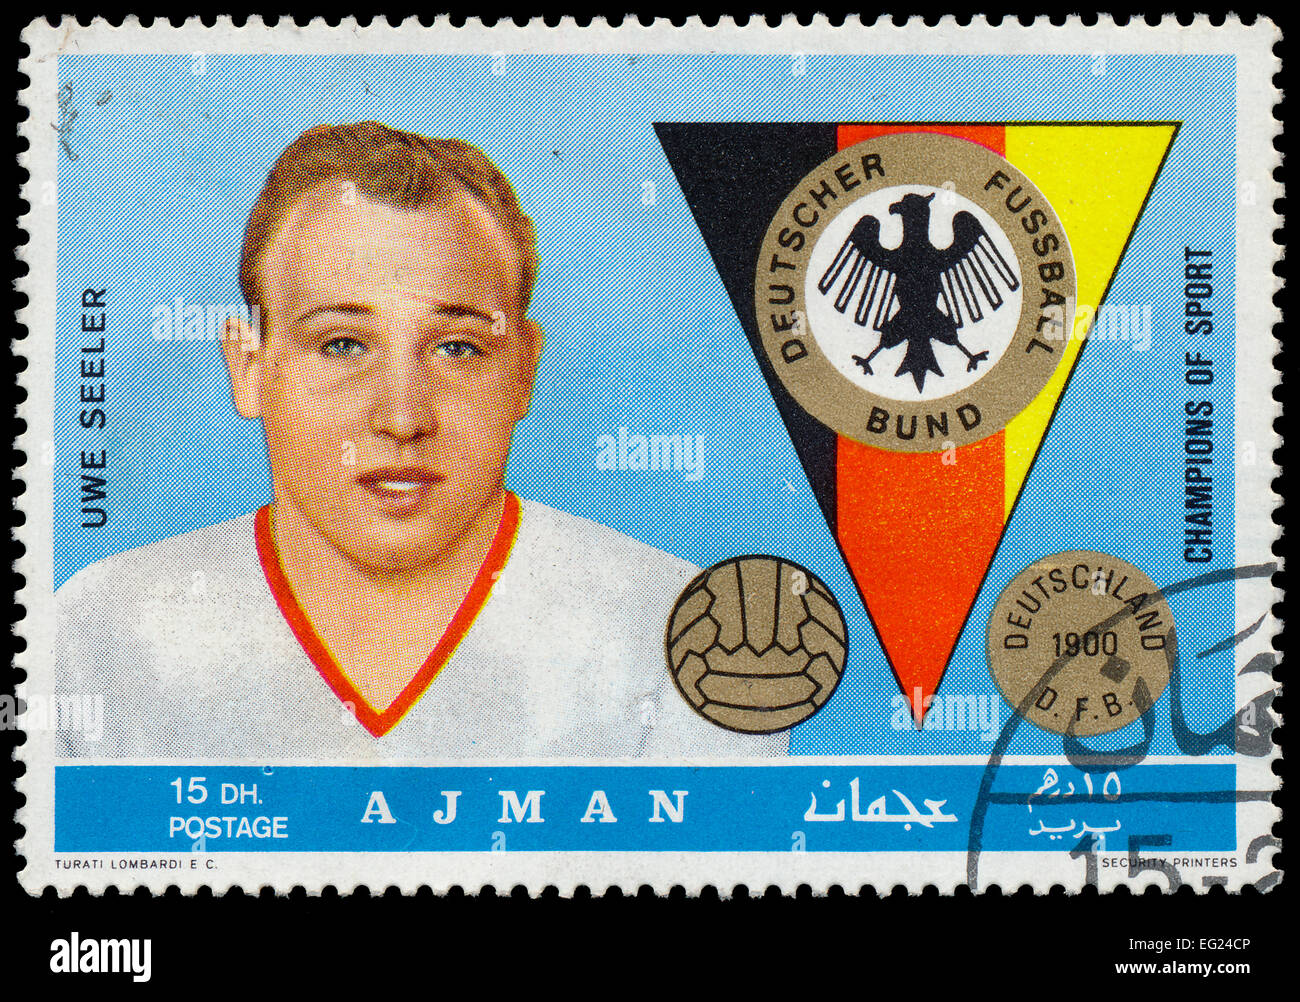 AJMAN - CIRCA 1969: a postage stamp printed in Ajman one of the emirares of the United Arab Emirates showing an image of Uwe See Stock Photo